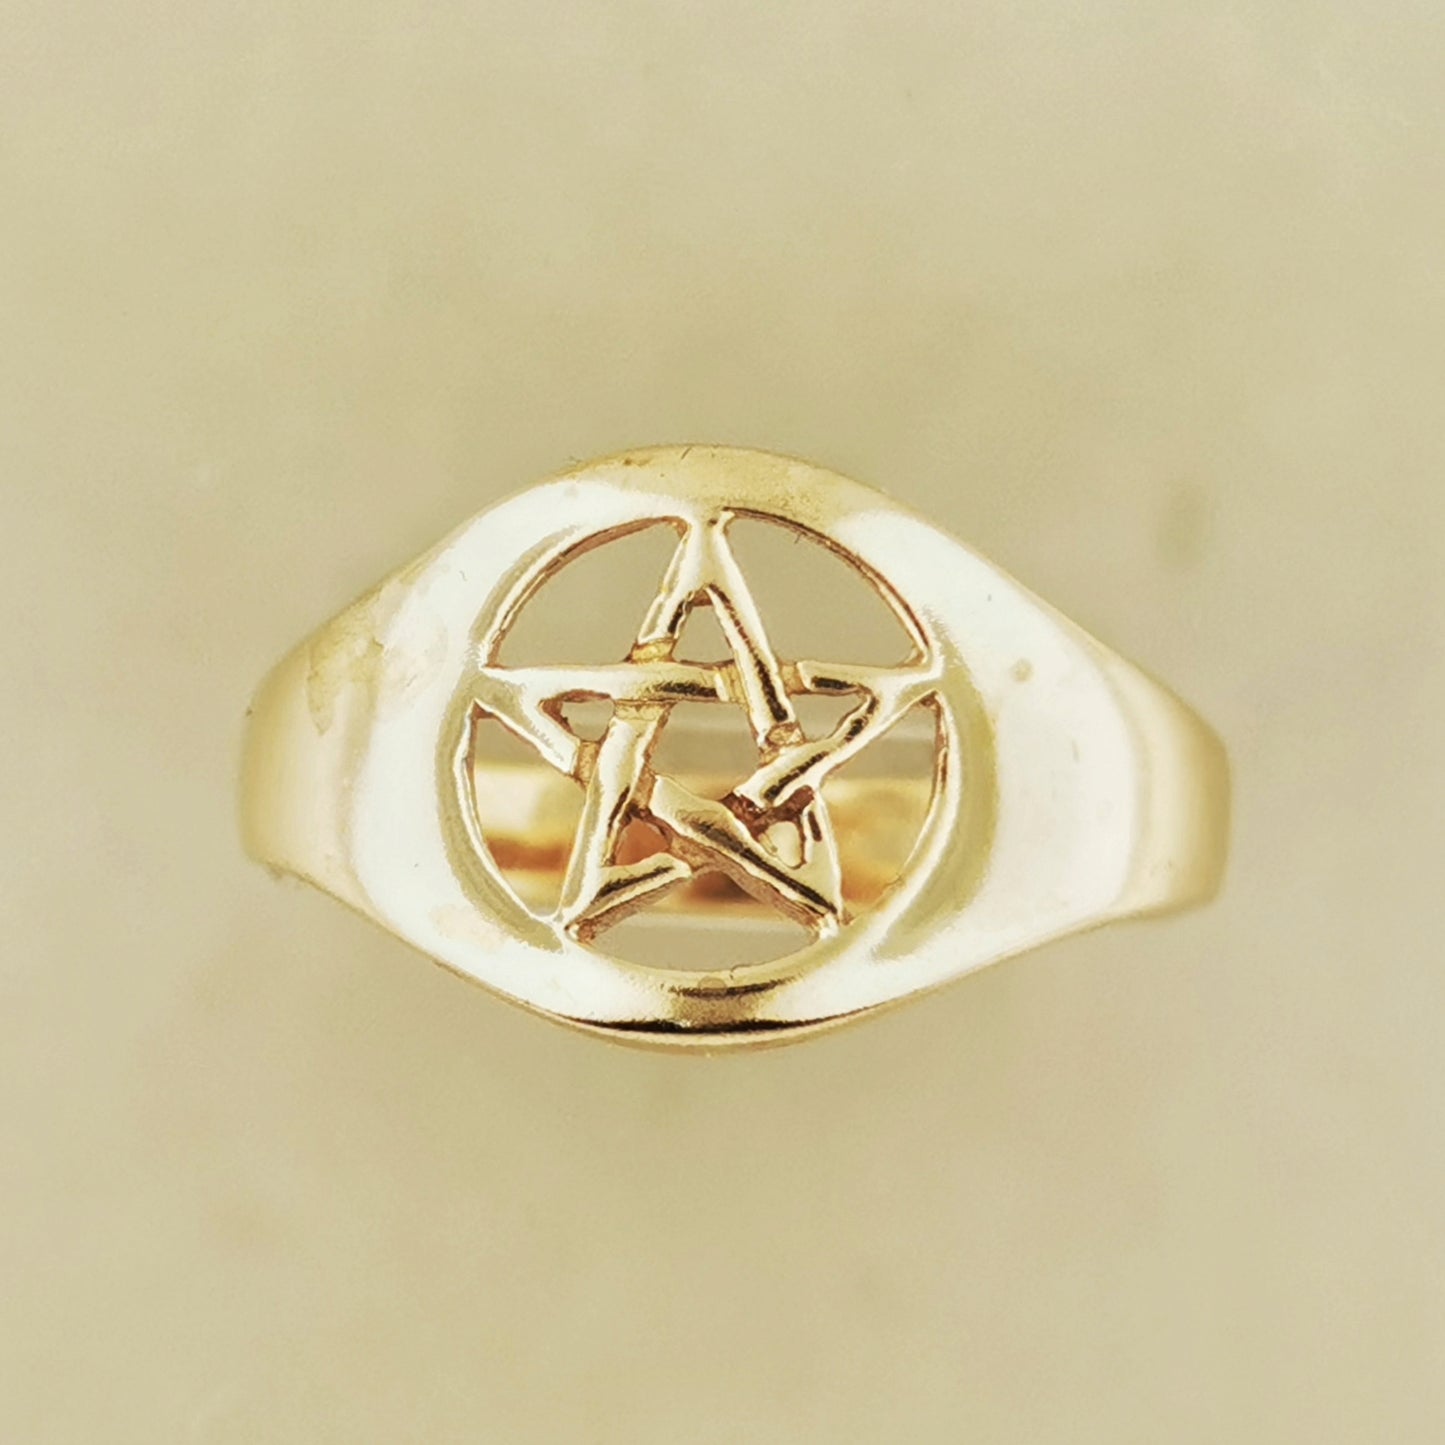 Medium Pentacle Ring in 925 Silver or Bronze, Mens Pentacle Ring Jewelry, Ladies Pentacle Ring Jewelry, Jewellery Gift for Wicca Pagan, Bronze Pagan Ring, Bronze Pentacle Ring, Bronze Wiccan Jewellery, Bronze Pagan Jewelry, Antique Bronze Witch Ring